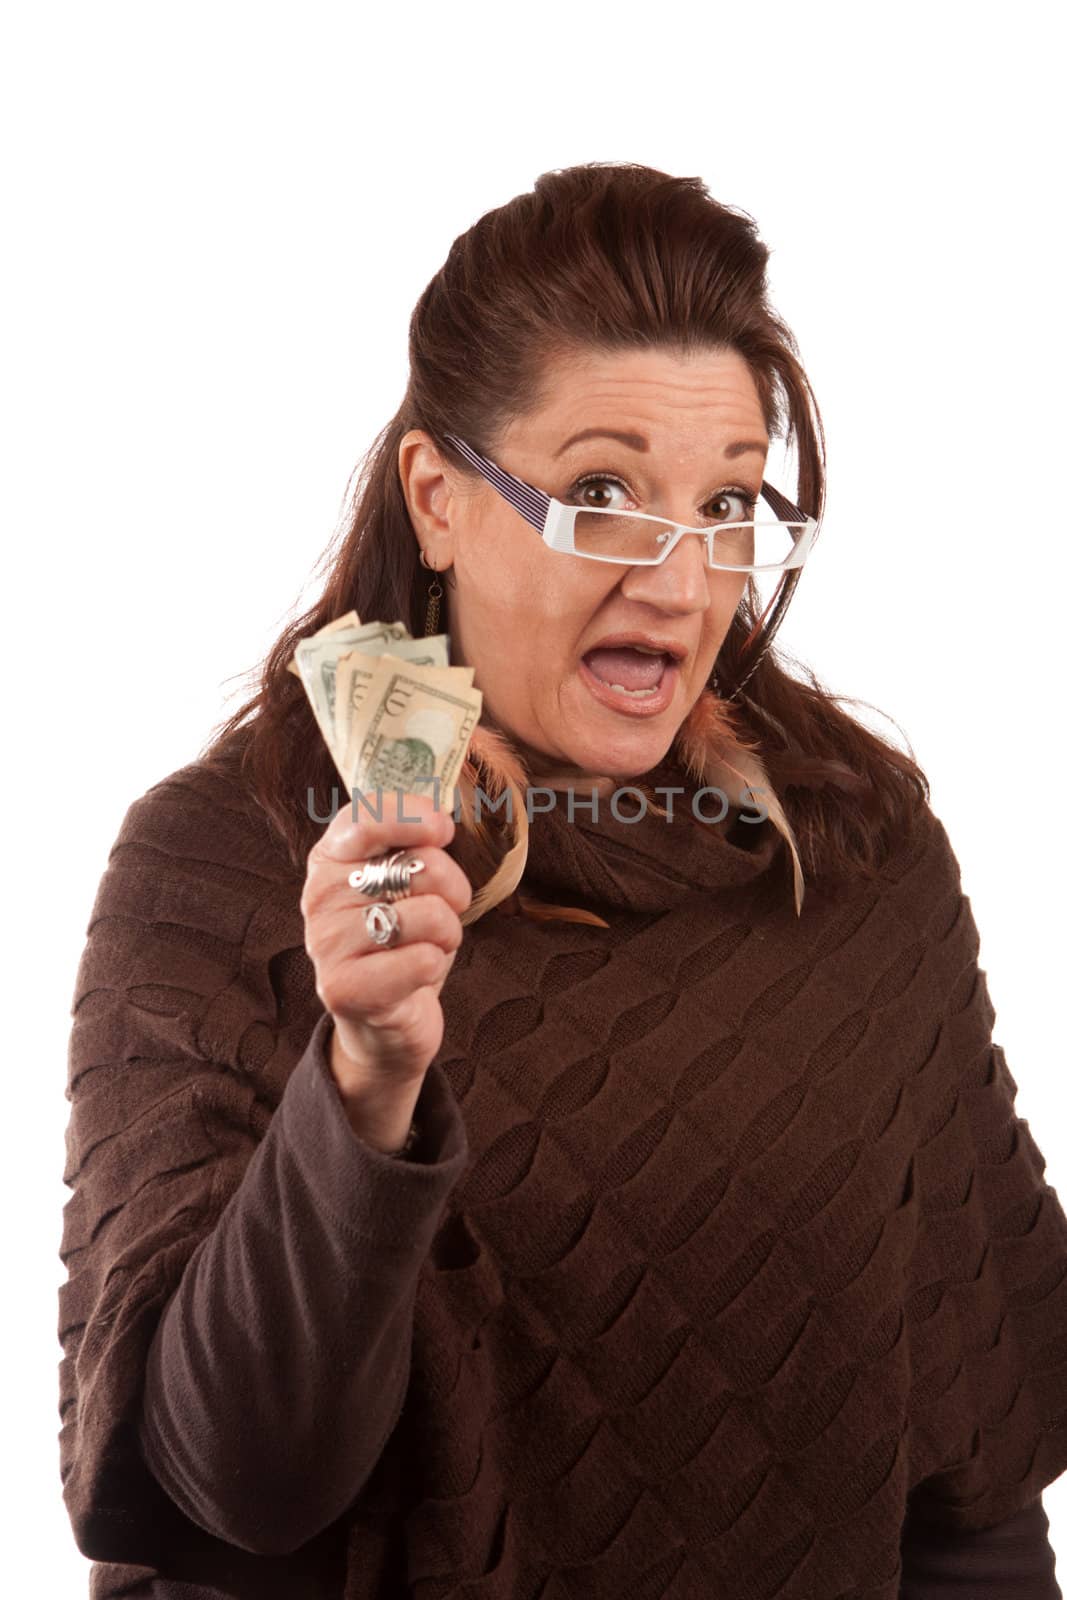 Woman holding money in her hand and shouting or cheering isolated on white.  A great concept for auction bidding or even shopping.